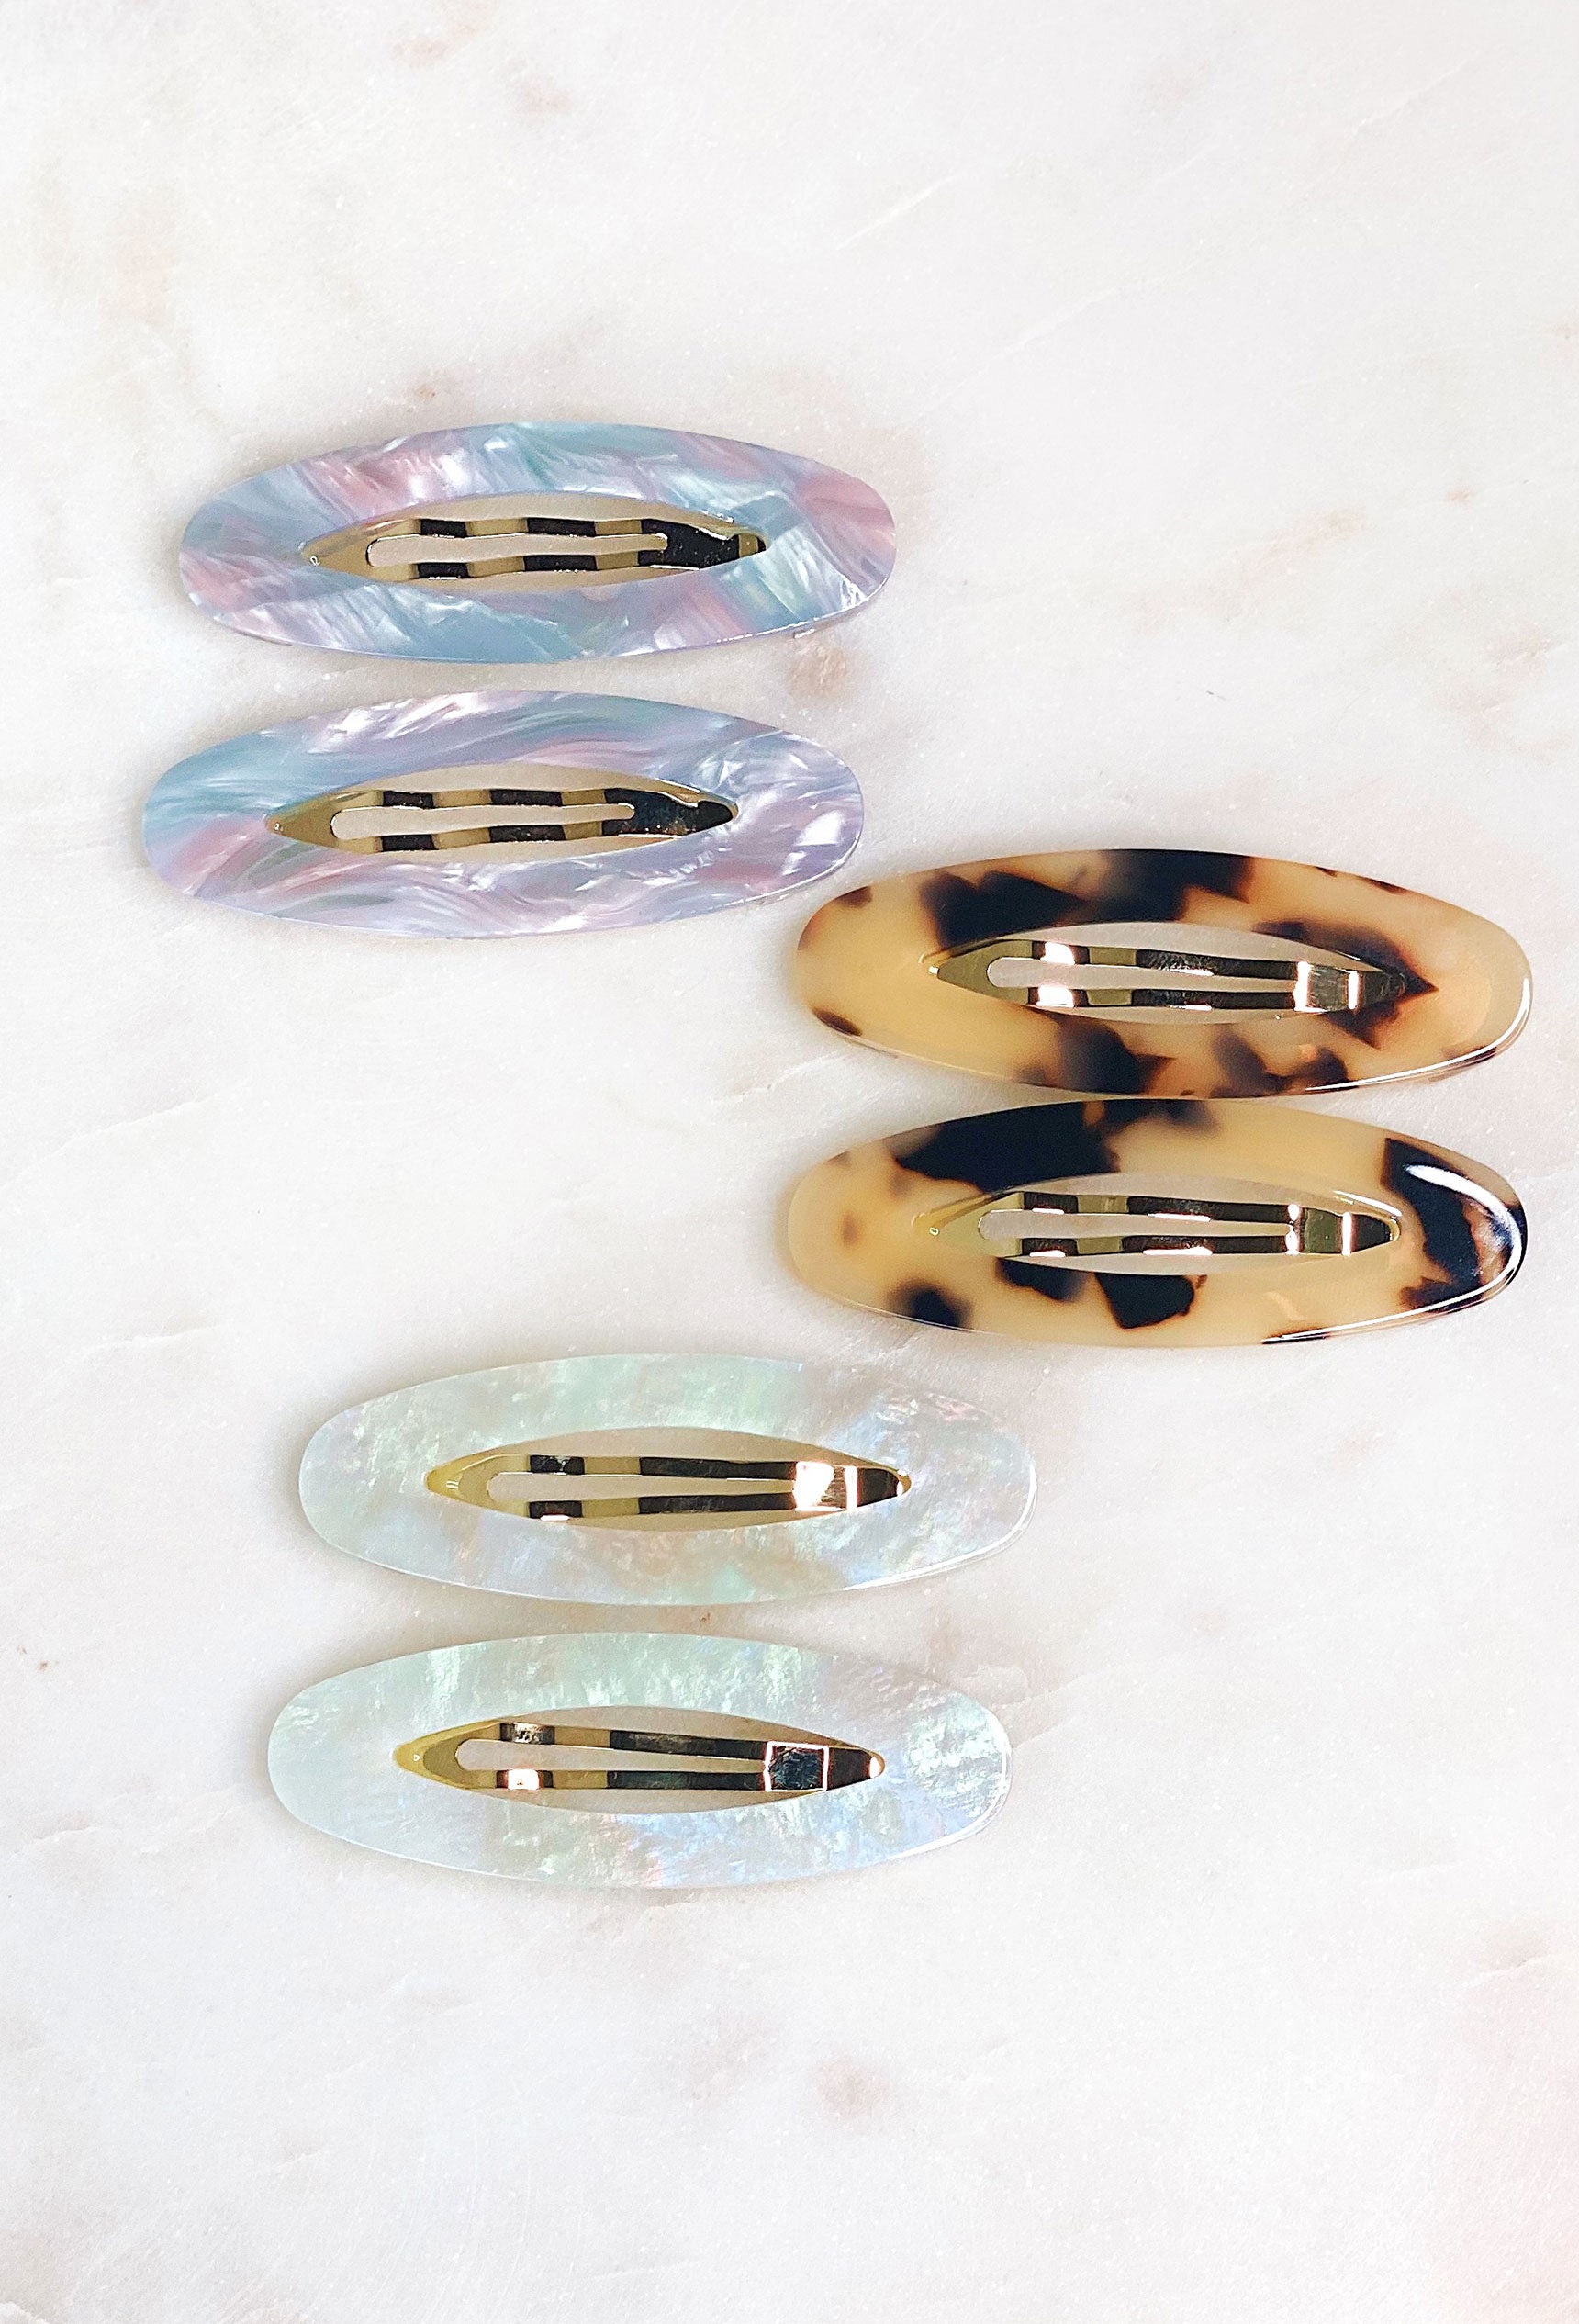 Cove Rectangle Hair Clips | Groovy's | Set of 2 Snap Clips Blue